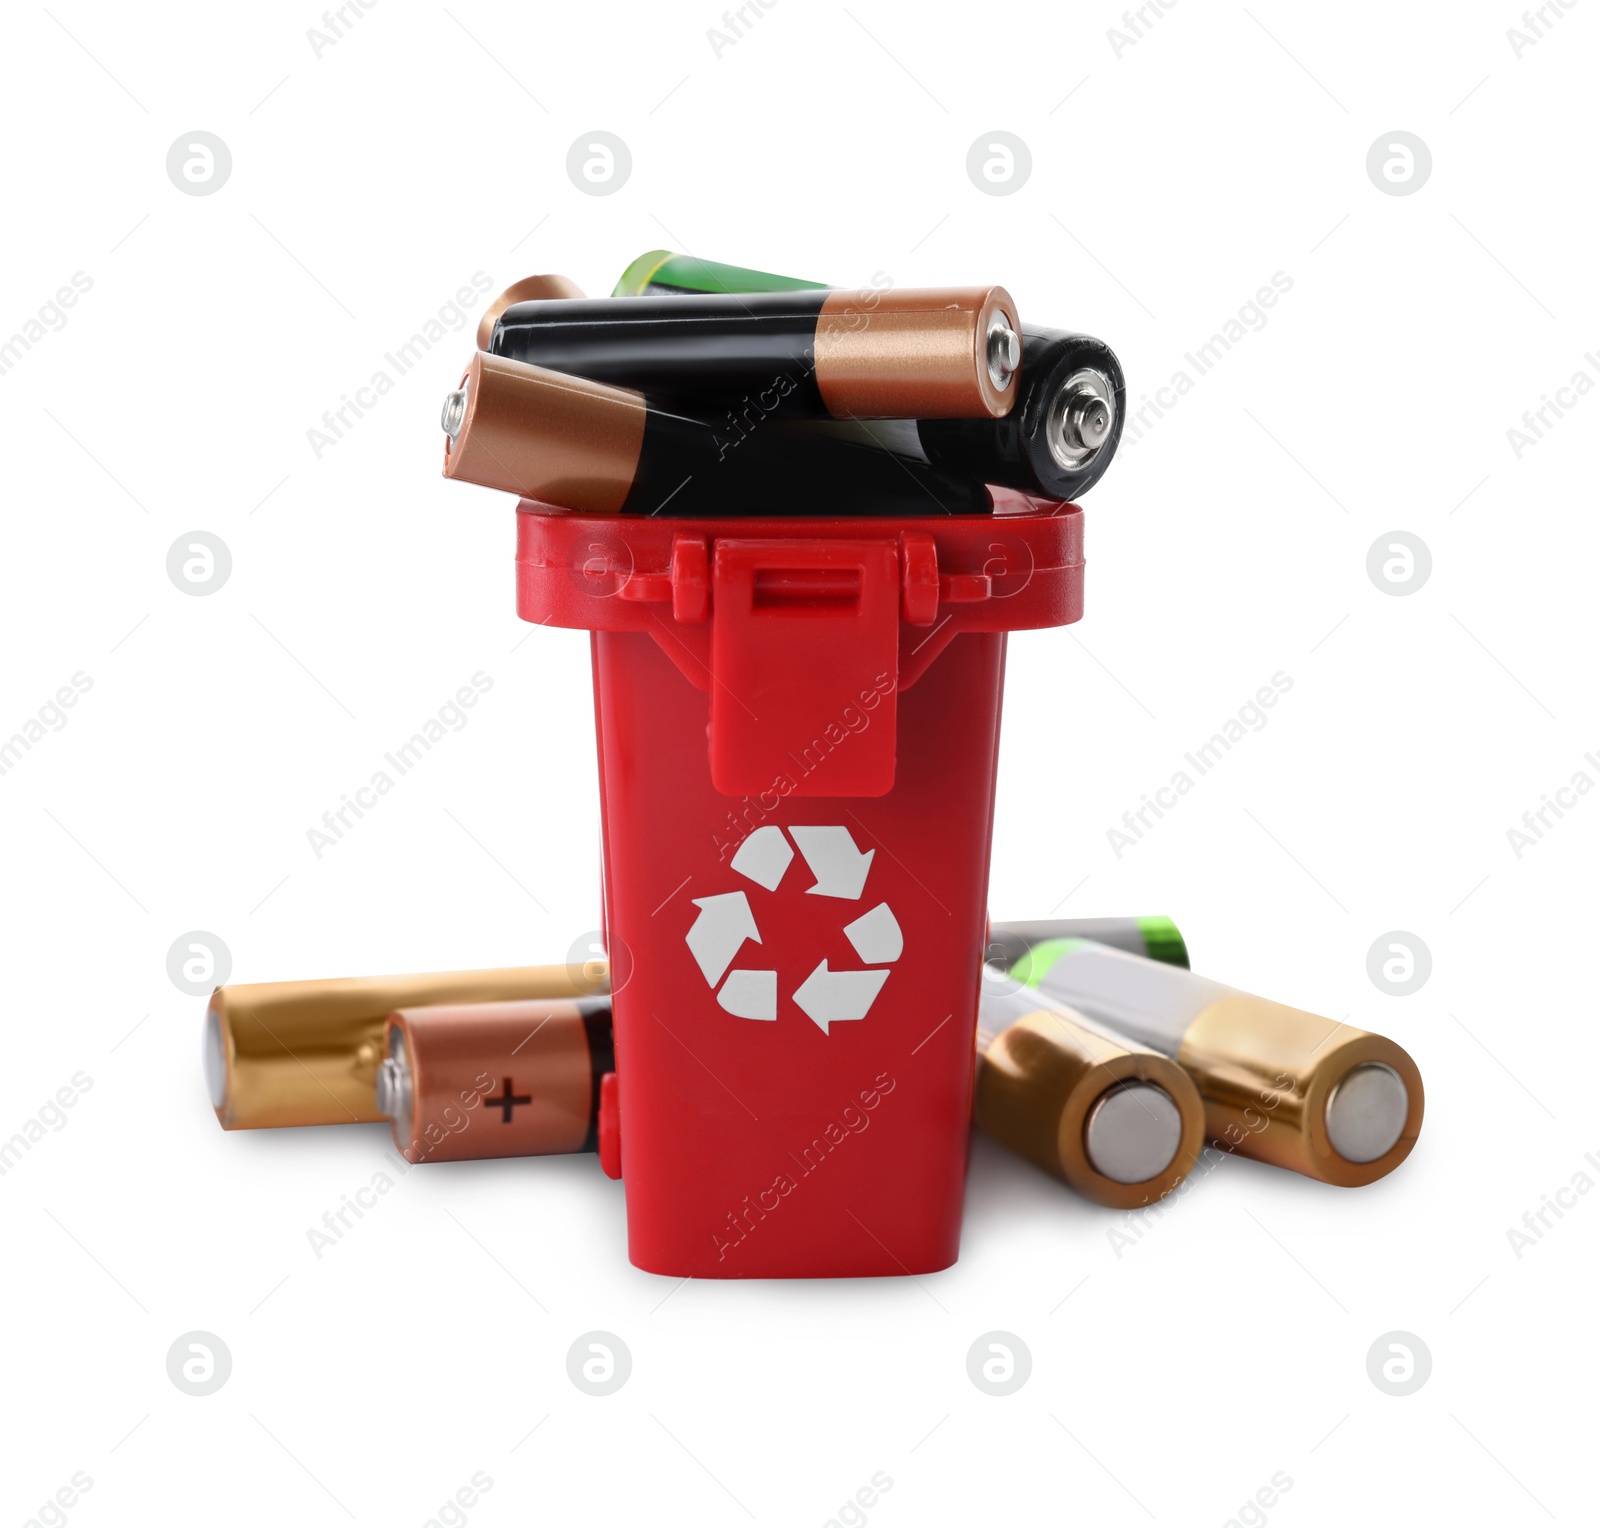 Image of Used batteries in recycling bin on white background